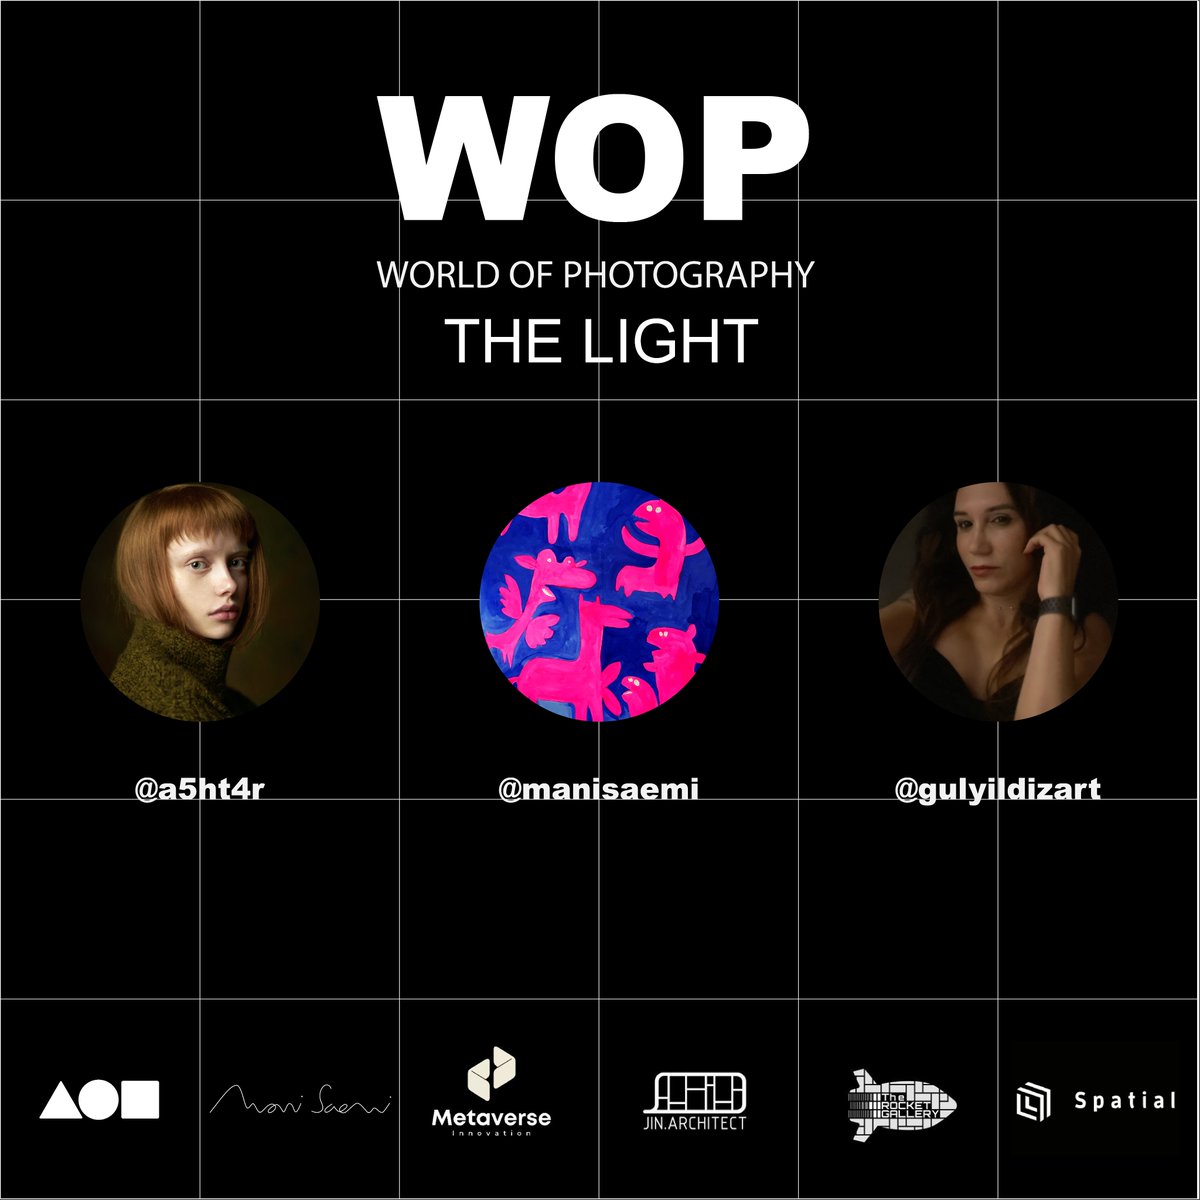 Exciting announcement! I'm thrilled to have the expertise of @a5ht4r and @gulyildizart joining me in curating the World of Photography (WOP). Their invaluable insights will ensure the highest level of curation for WOP on @foundation

🌟 Theme: 'The Light'

⚫⚪ Medium: Black and…